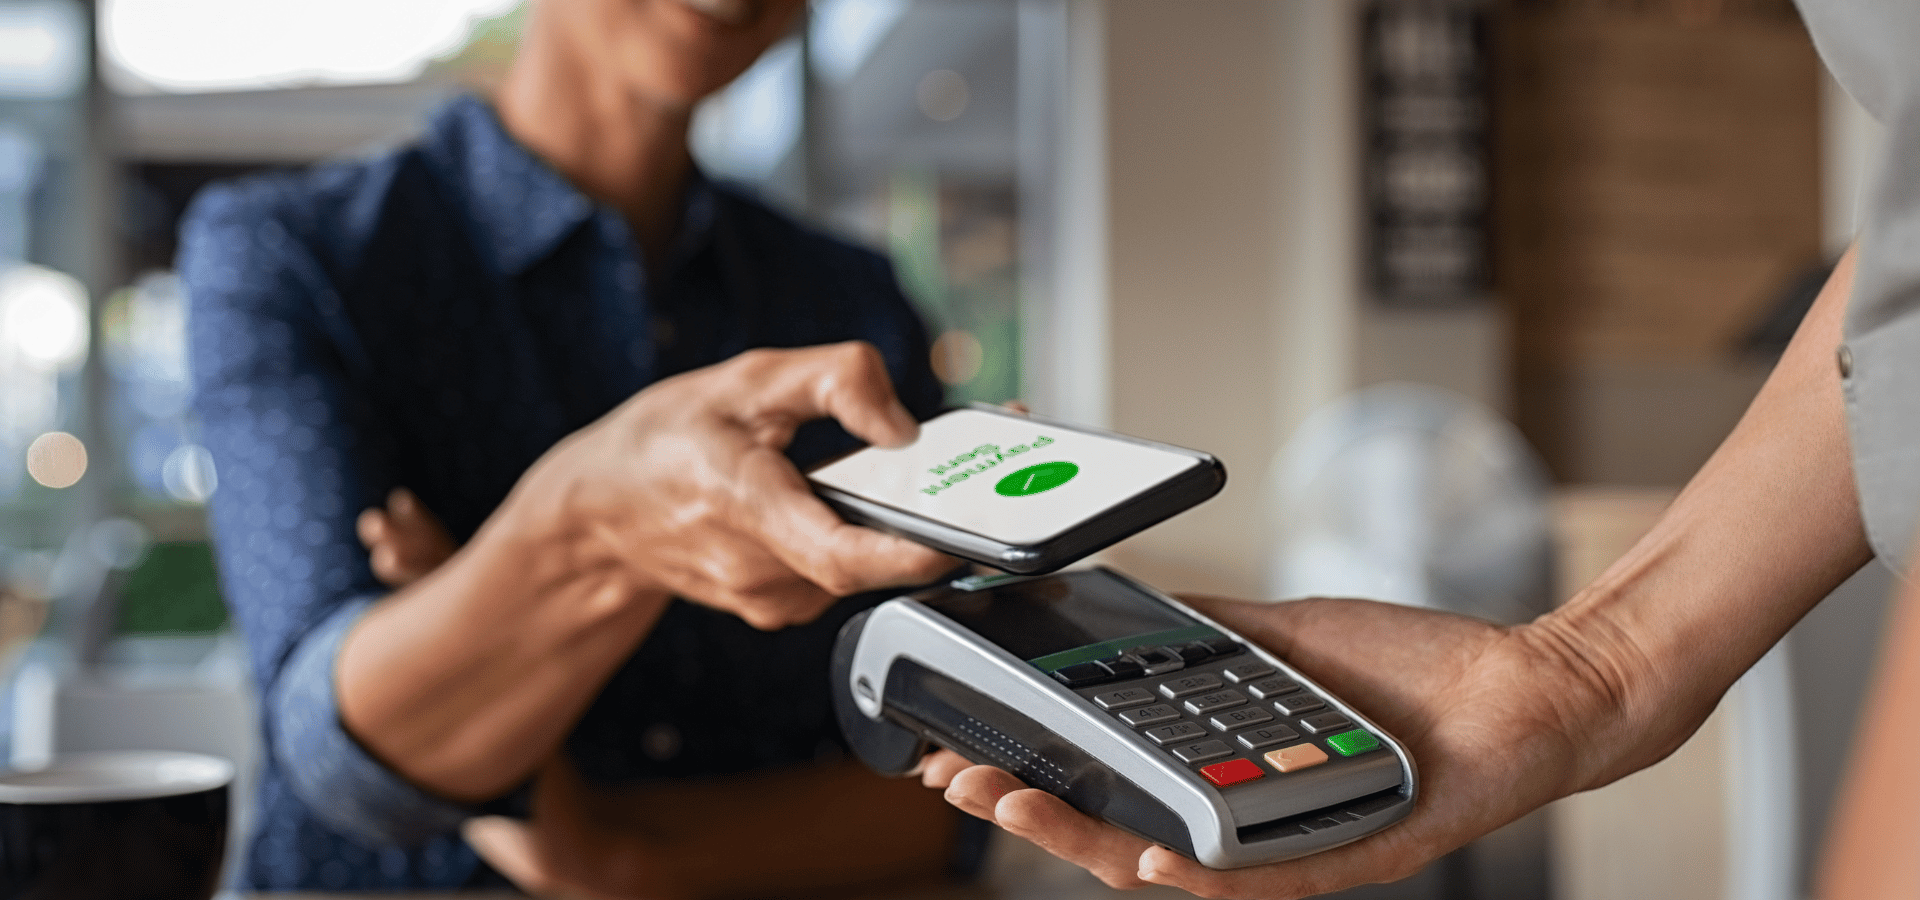 PAYING WITH DIGITAL WALLET IN CELL PHONE